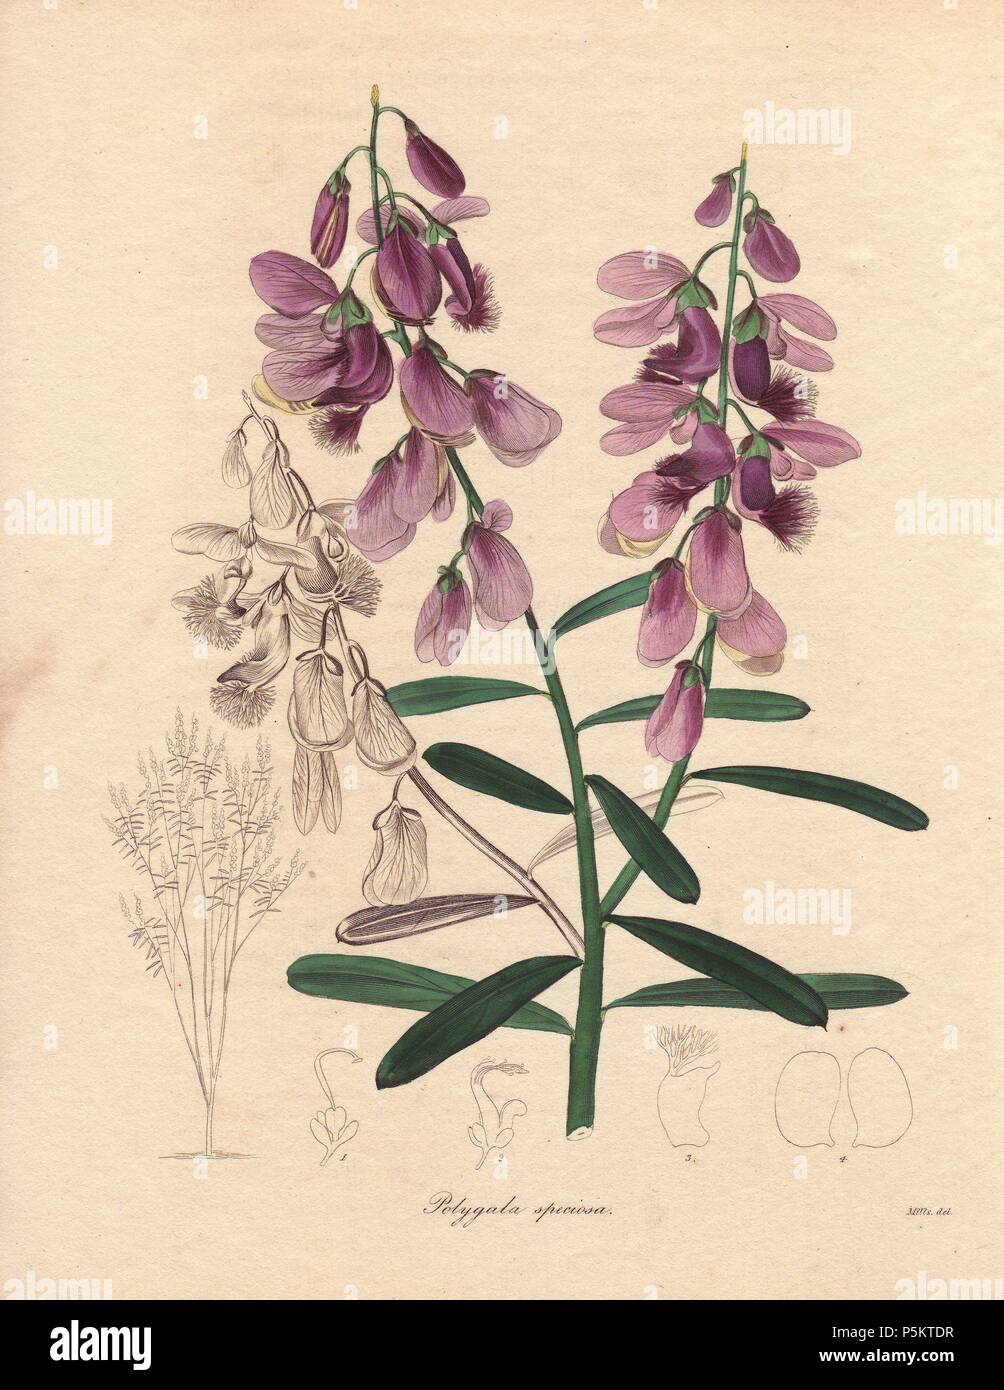 Polygala speciosa is a type of milkwort with fine pale purple flowers from the Cape of Good Hope, South Africa.. Miss R. Mills (active 18361842) was also the main illustrator for Knowles and Westcott’s The Floral Cabinet (1837-1842). . Benjamin Maund's The Botanist was a five-volume series that introduced 250 new plants from 1836 to 1842. The series is notable for its many female artists: the plates were drawn by Maund's daughters Sarah and Eliza, Augusta Withers, Priscilla Bury, Jane Taylor, Miss R. Mills among others. The other characteristic is partial colouring - many of the finely detail Stock Photo